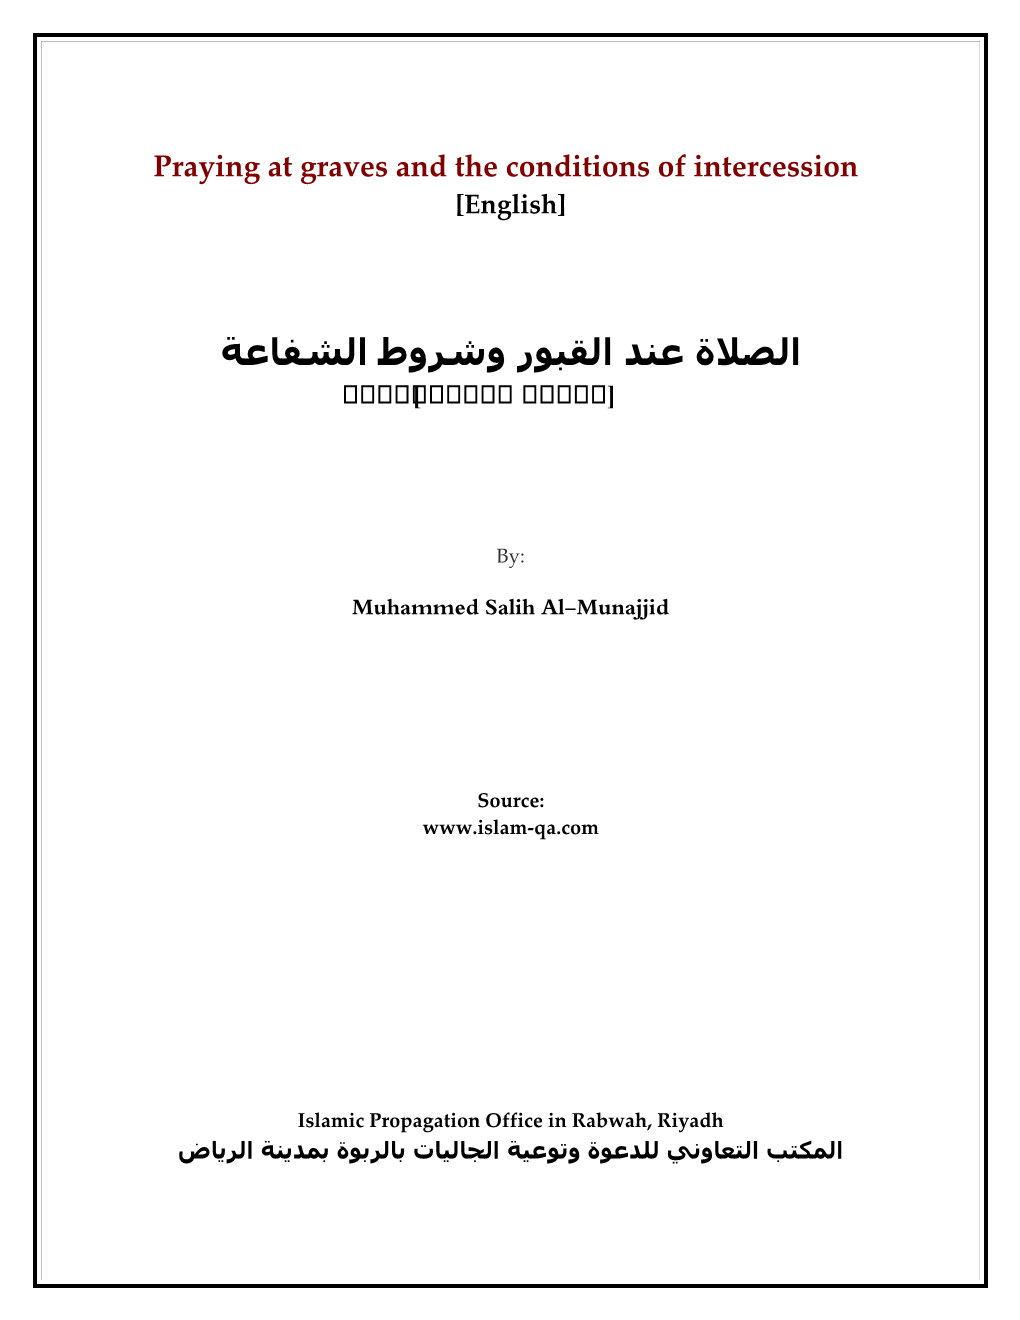 Praying at Graves and the Conditions of Intercession